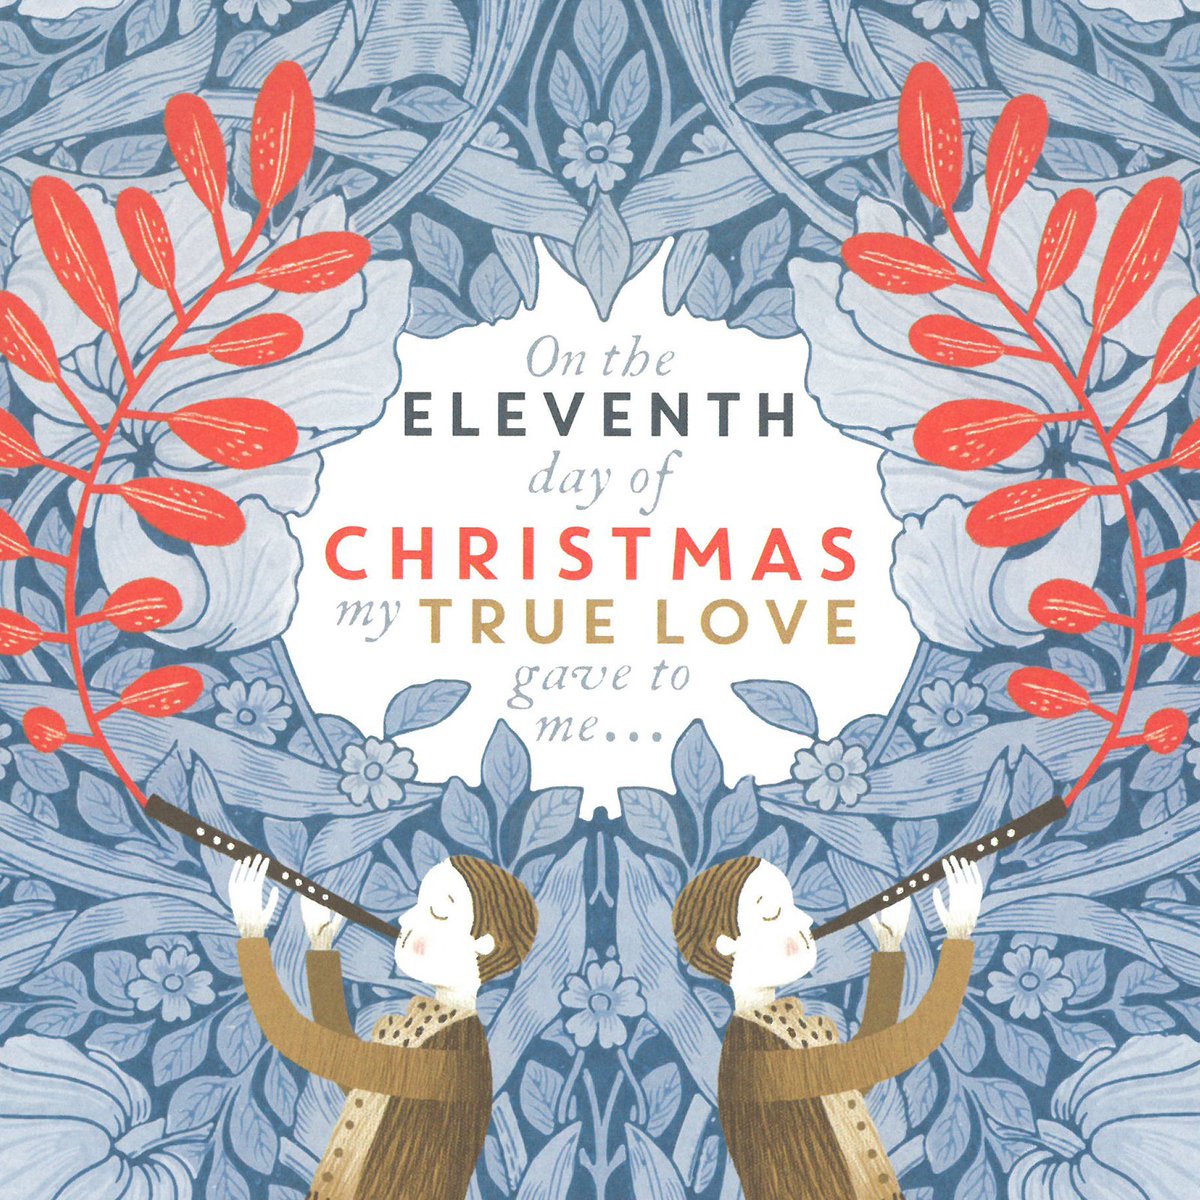 V A On Twitter It Is The Eleventh Day Of Christmas And Eleven